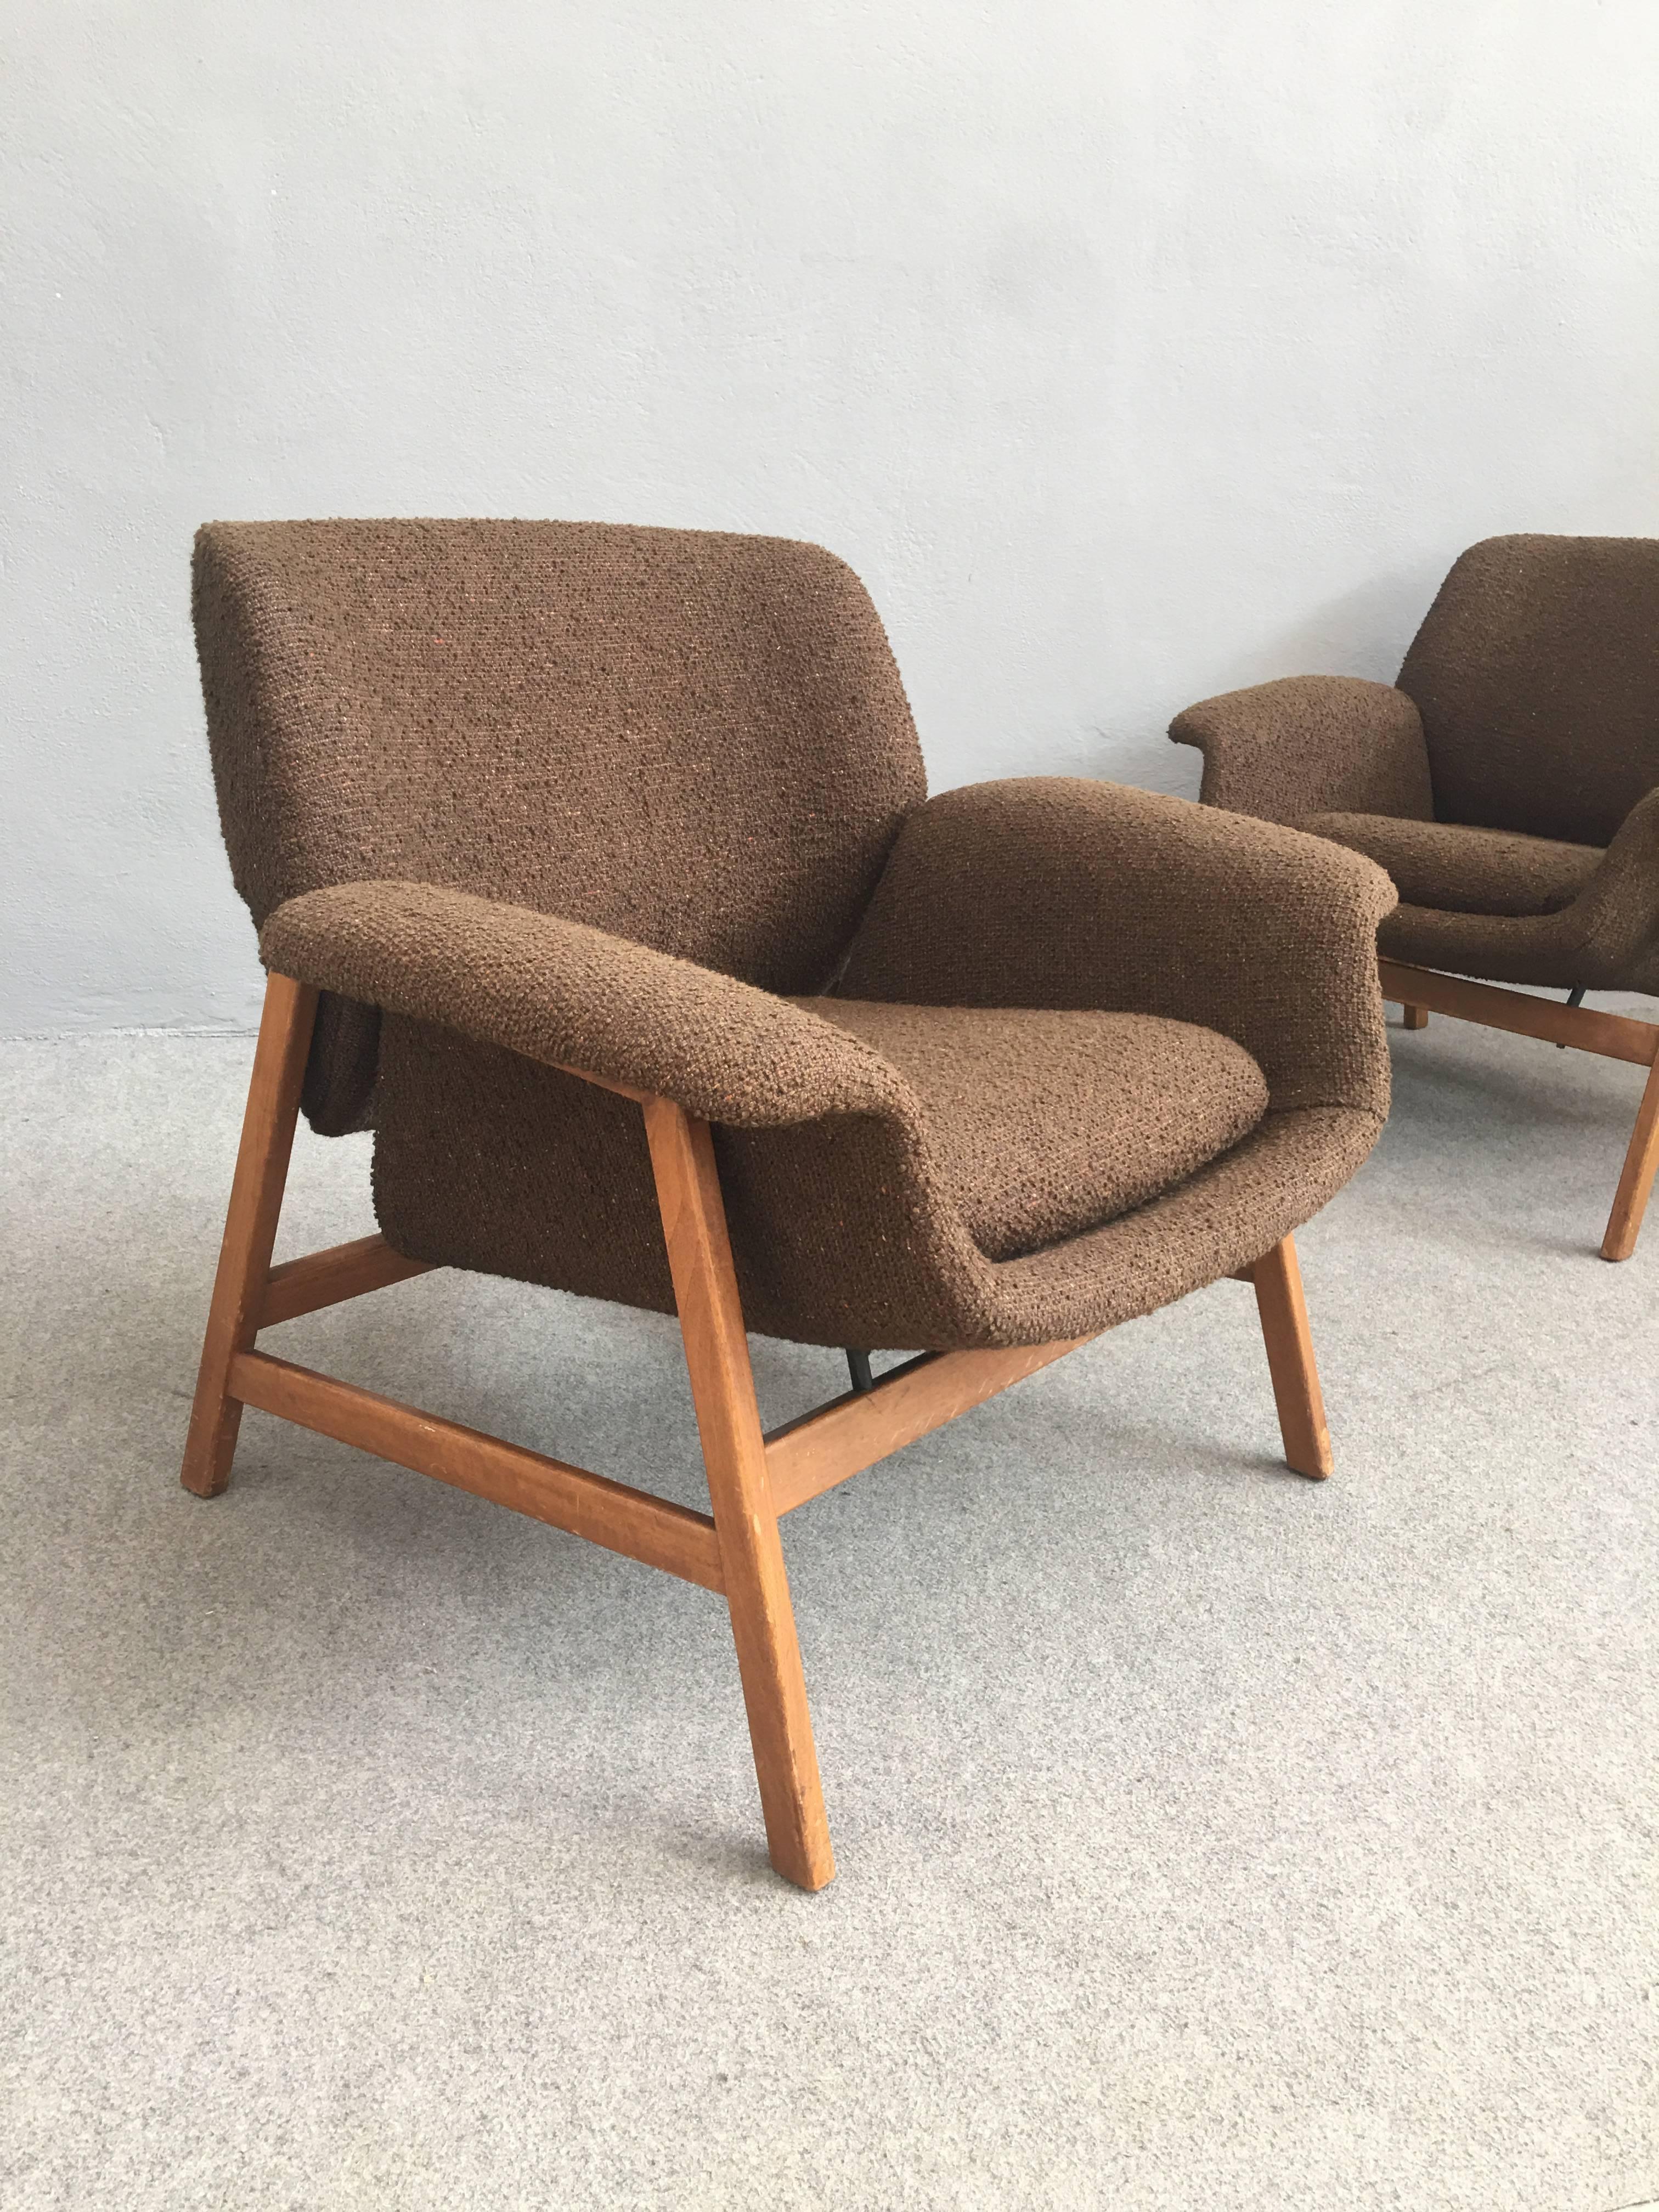 Mid-Century Modern Iconic Pair of Armchairs 849 by Gianfranco Frattini for Cassina